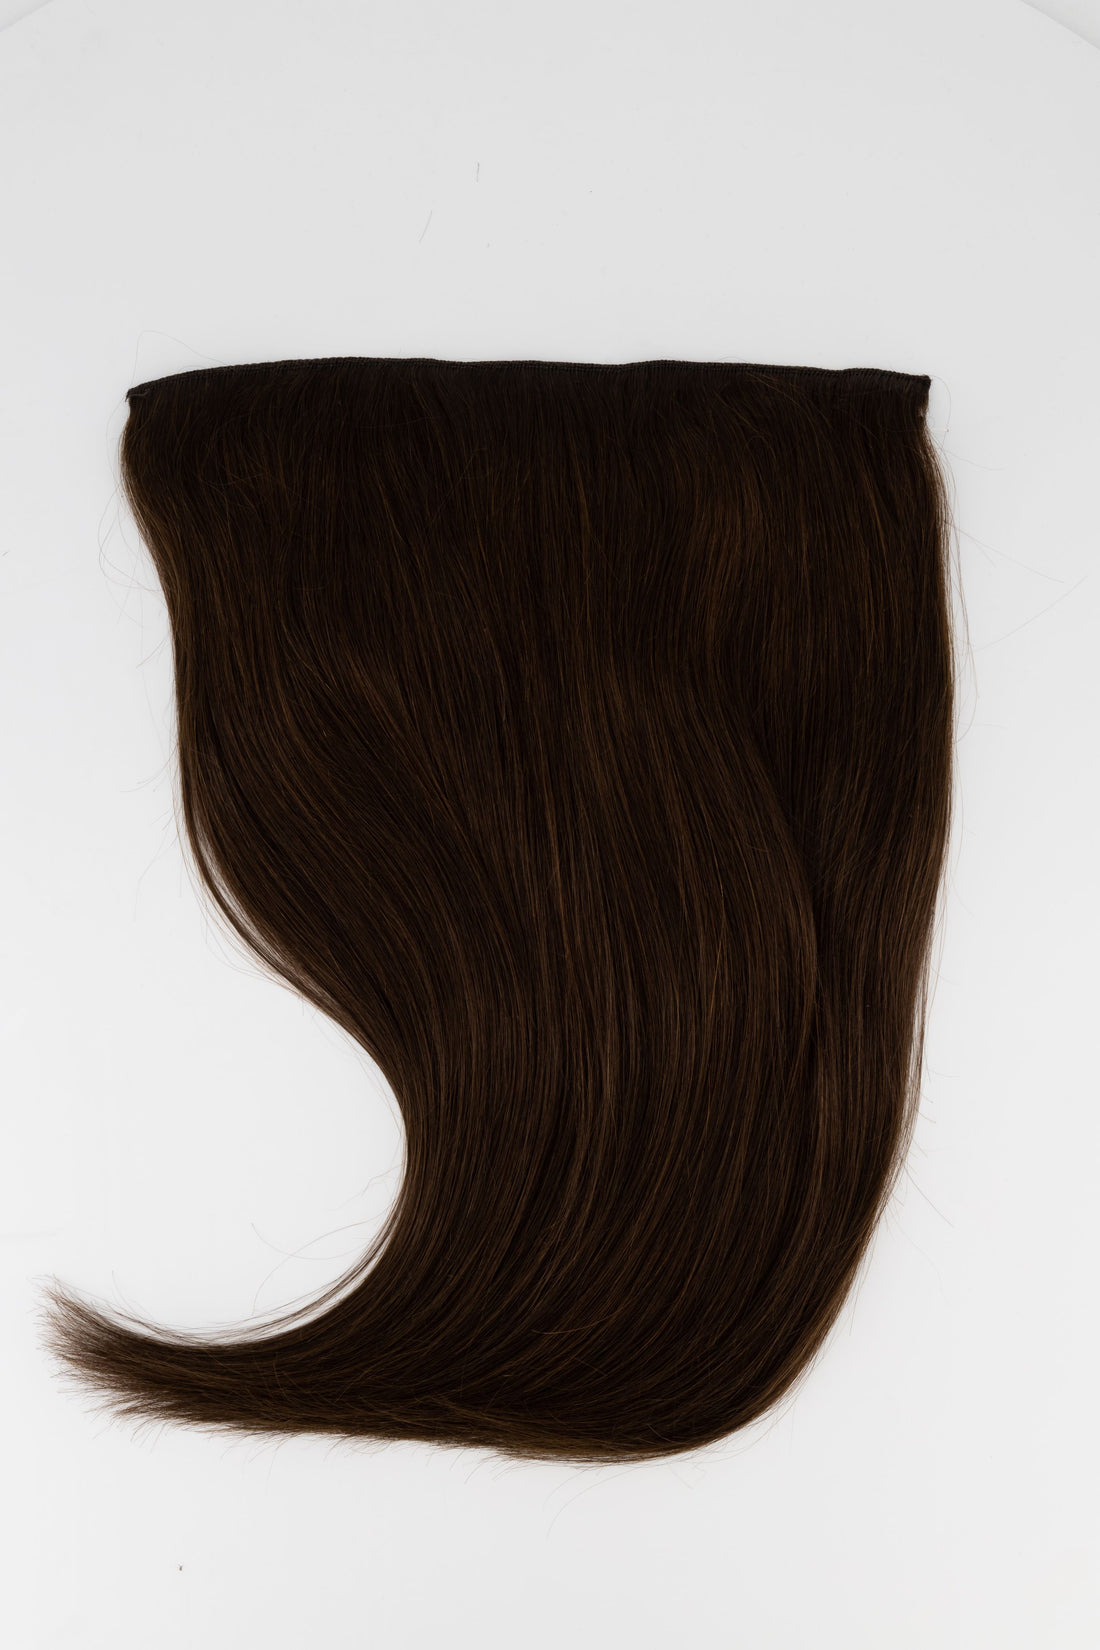 Frontrow halo hair extensions in dark brown